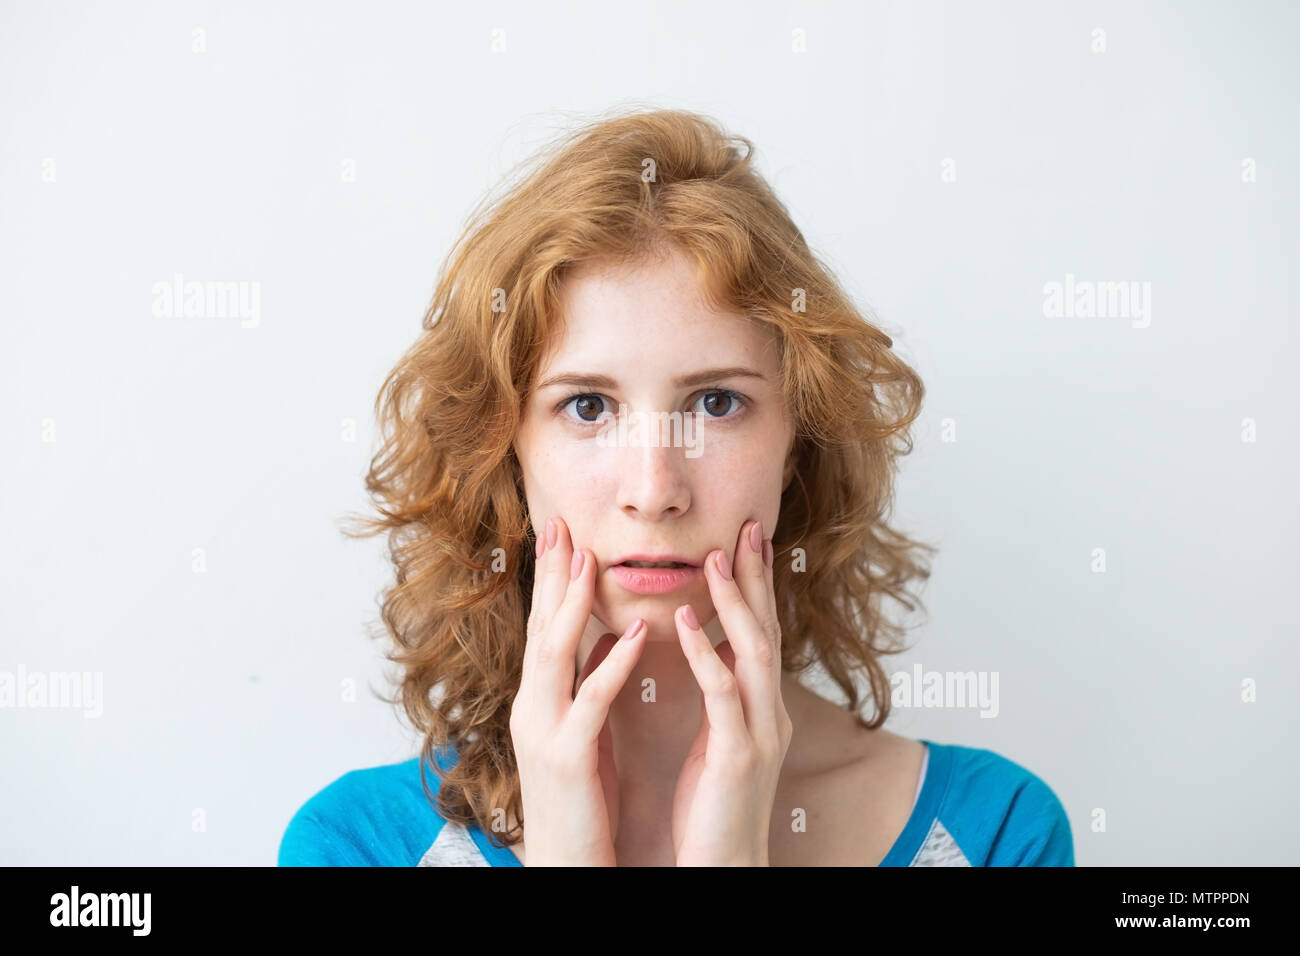 Amazed female model with red curly hair, wearing t-shirt, looking with bugged eyes Stock Photo